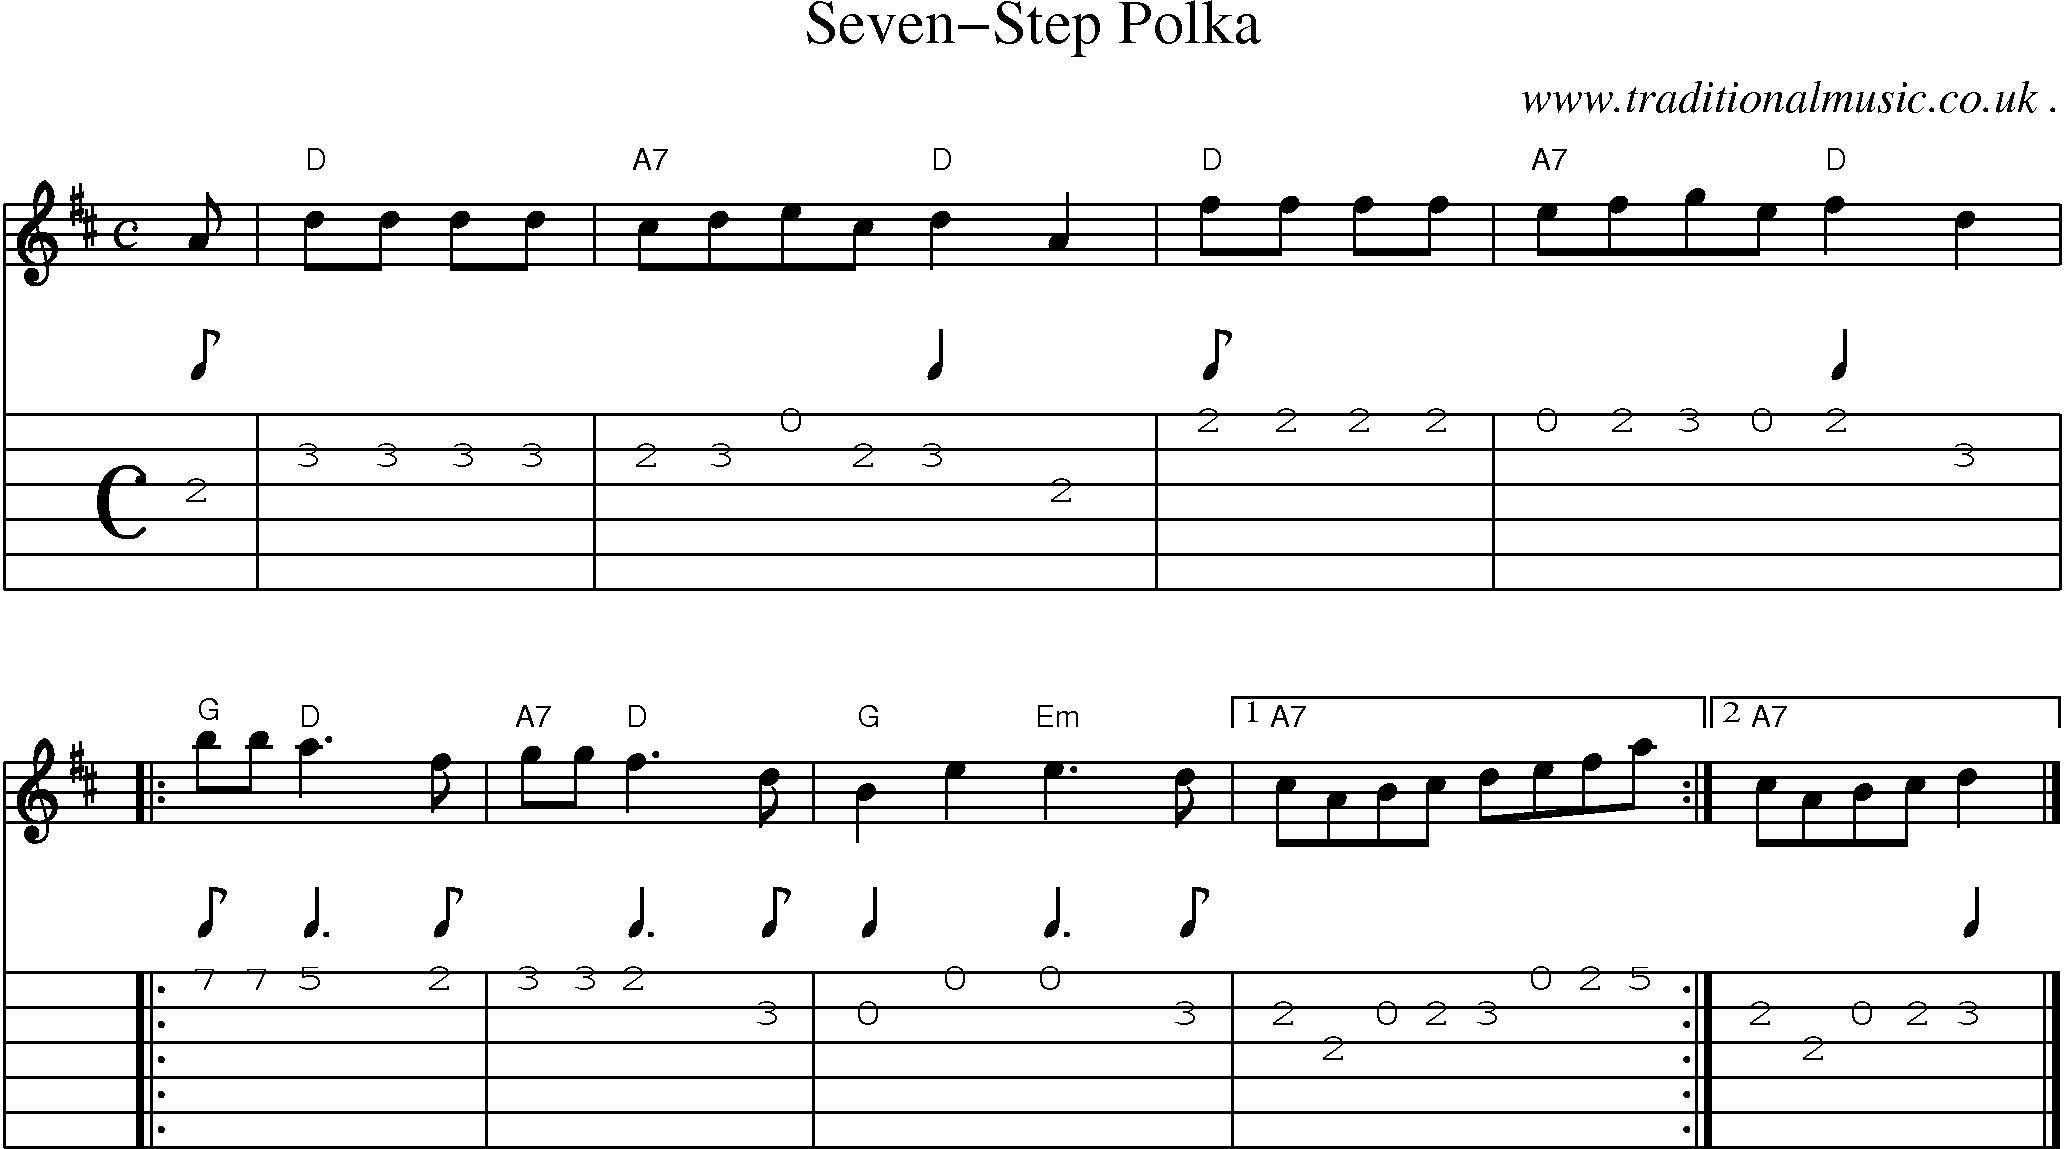 Sheet-music  score, Chords and Guitar Tabs for Seven-step Polka